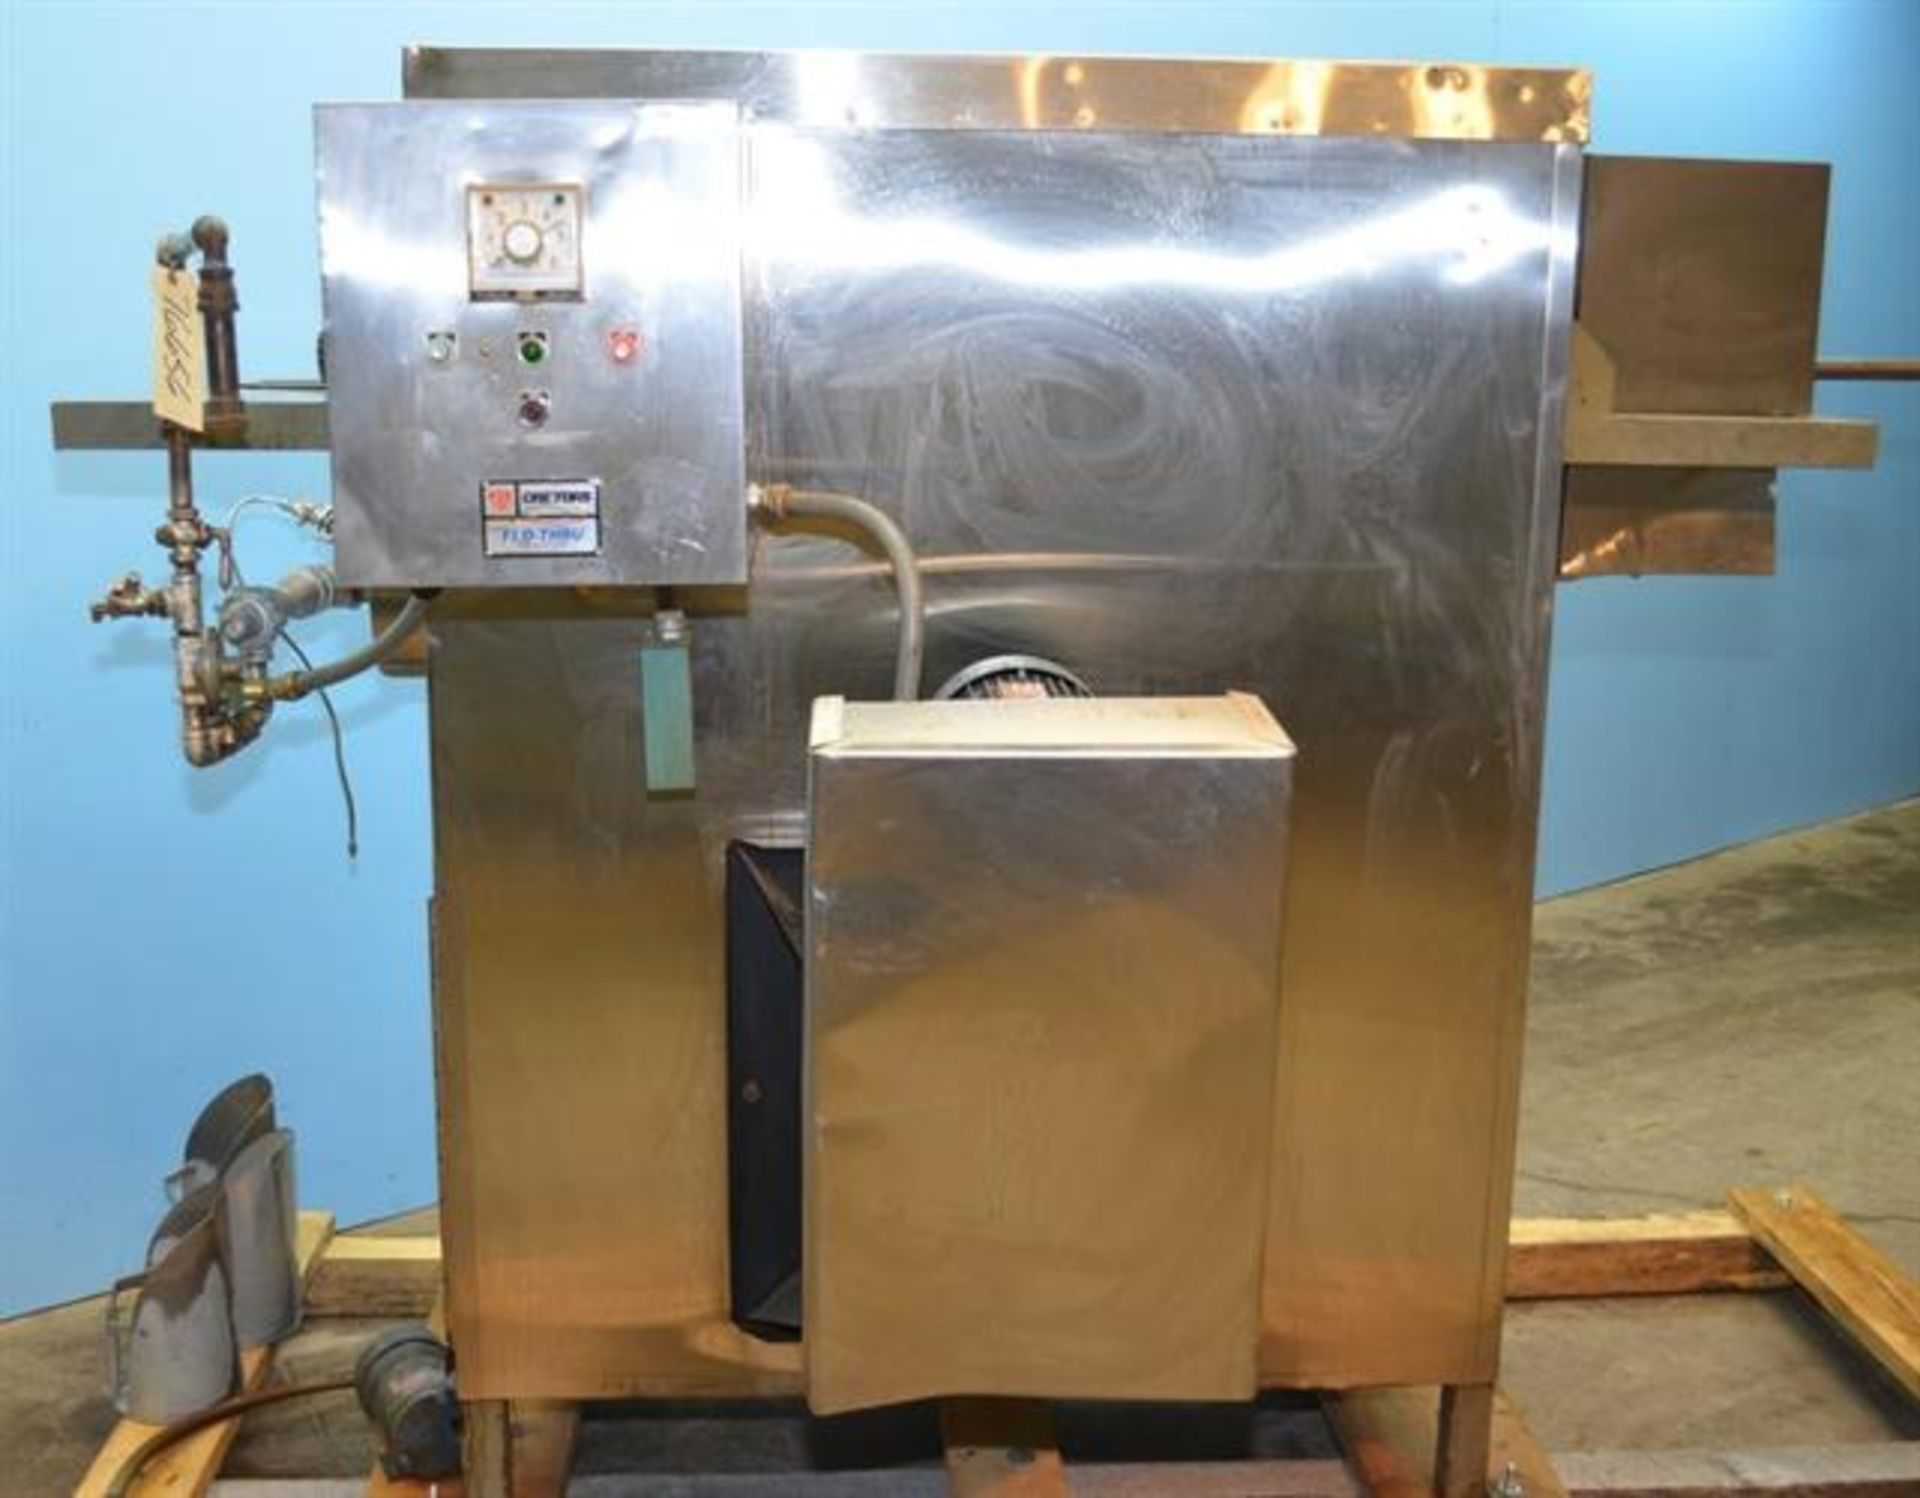 Cretors FT200 200 lb/hr Continuous Dry Popper - Natural gas fired - 120,000 btu/hr - Serial#91031063 - Image 2 of 13